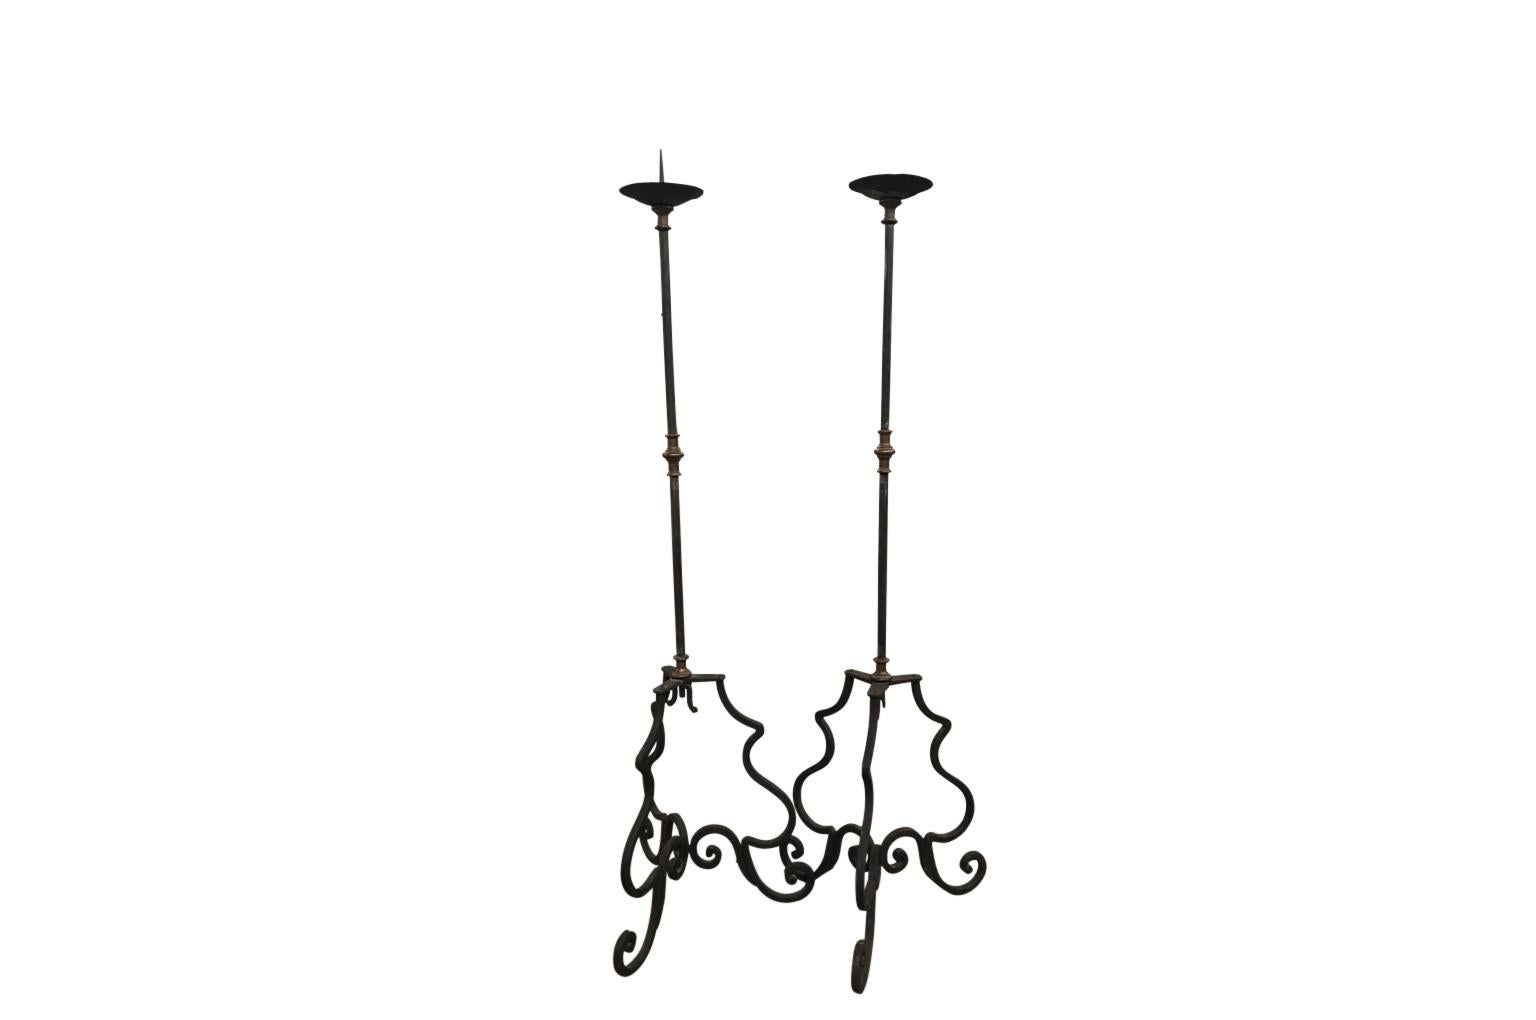 A very striking pair of 18th century Italian torcheres crafted from hand forged iron and bronze. Beautiful.